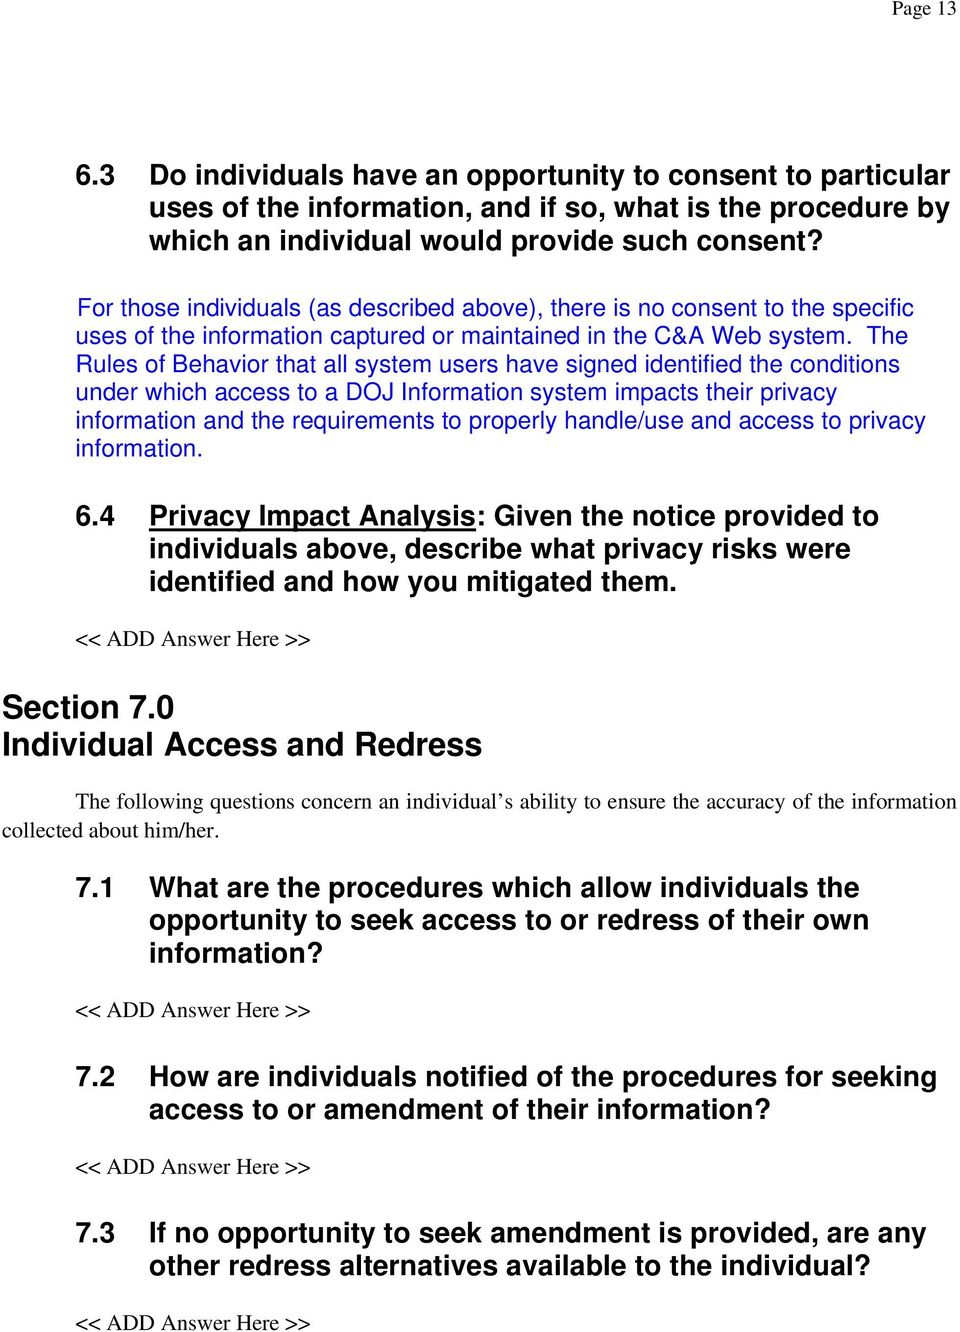 The Rules of Behavior that all system users have signed identified the conditions under which access to a DOJ Information system impacts their privacy information and the requirements to properly